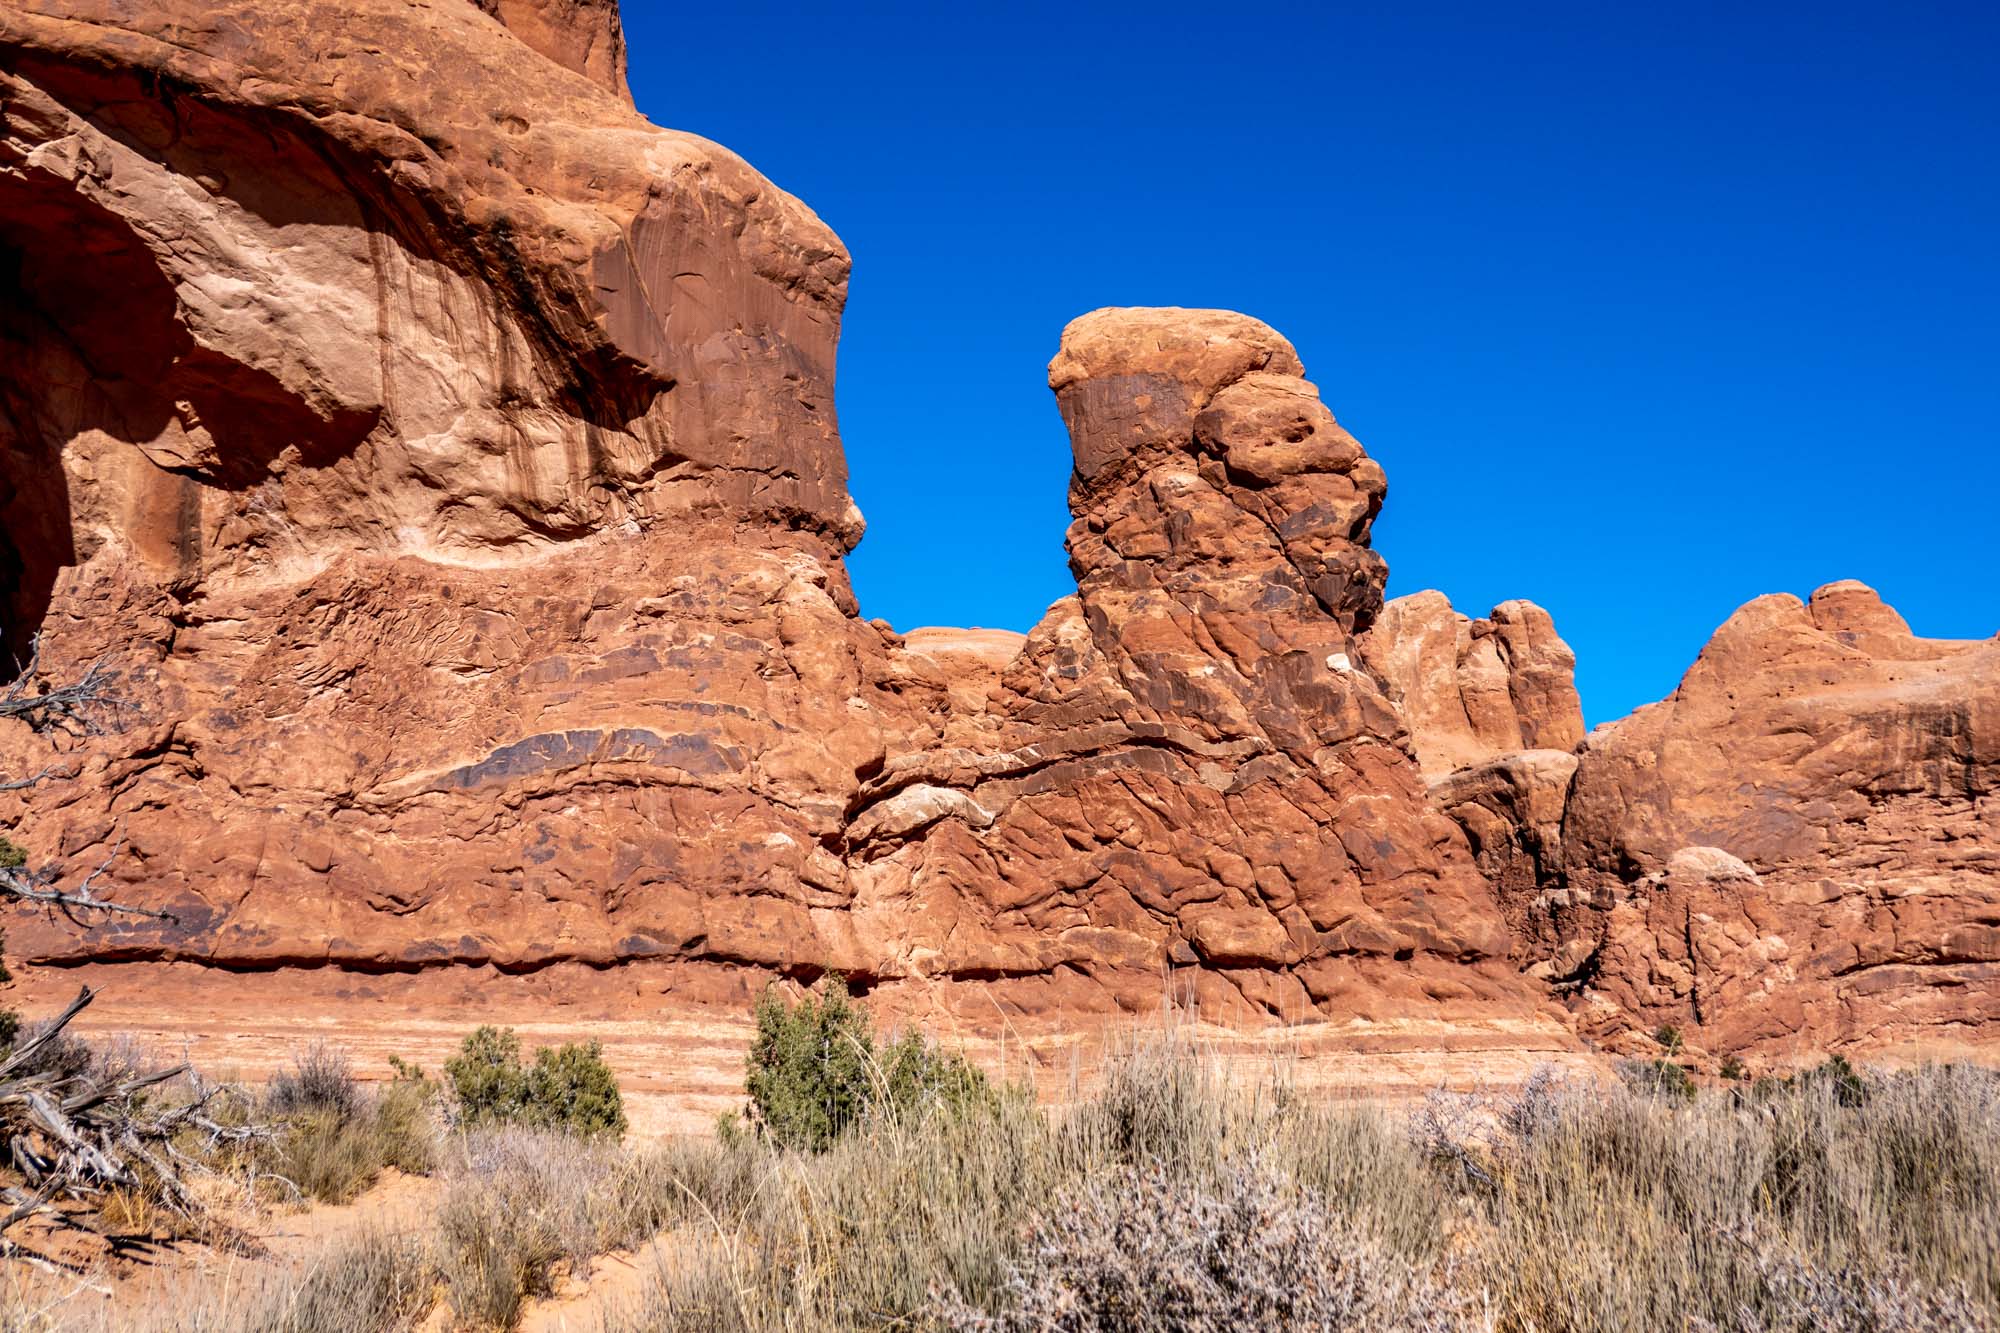 Sandstone rock formation that resembles Lions Head in Arches